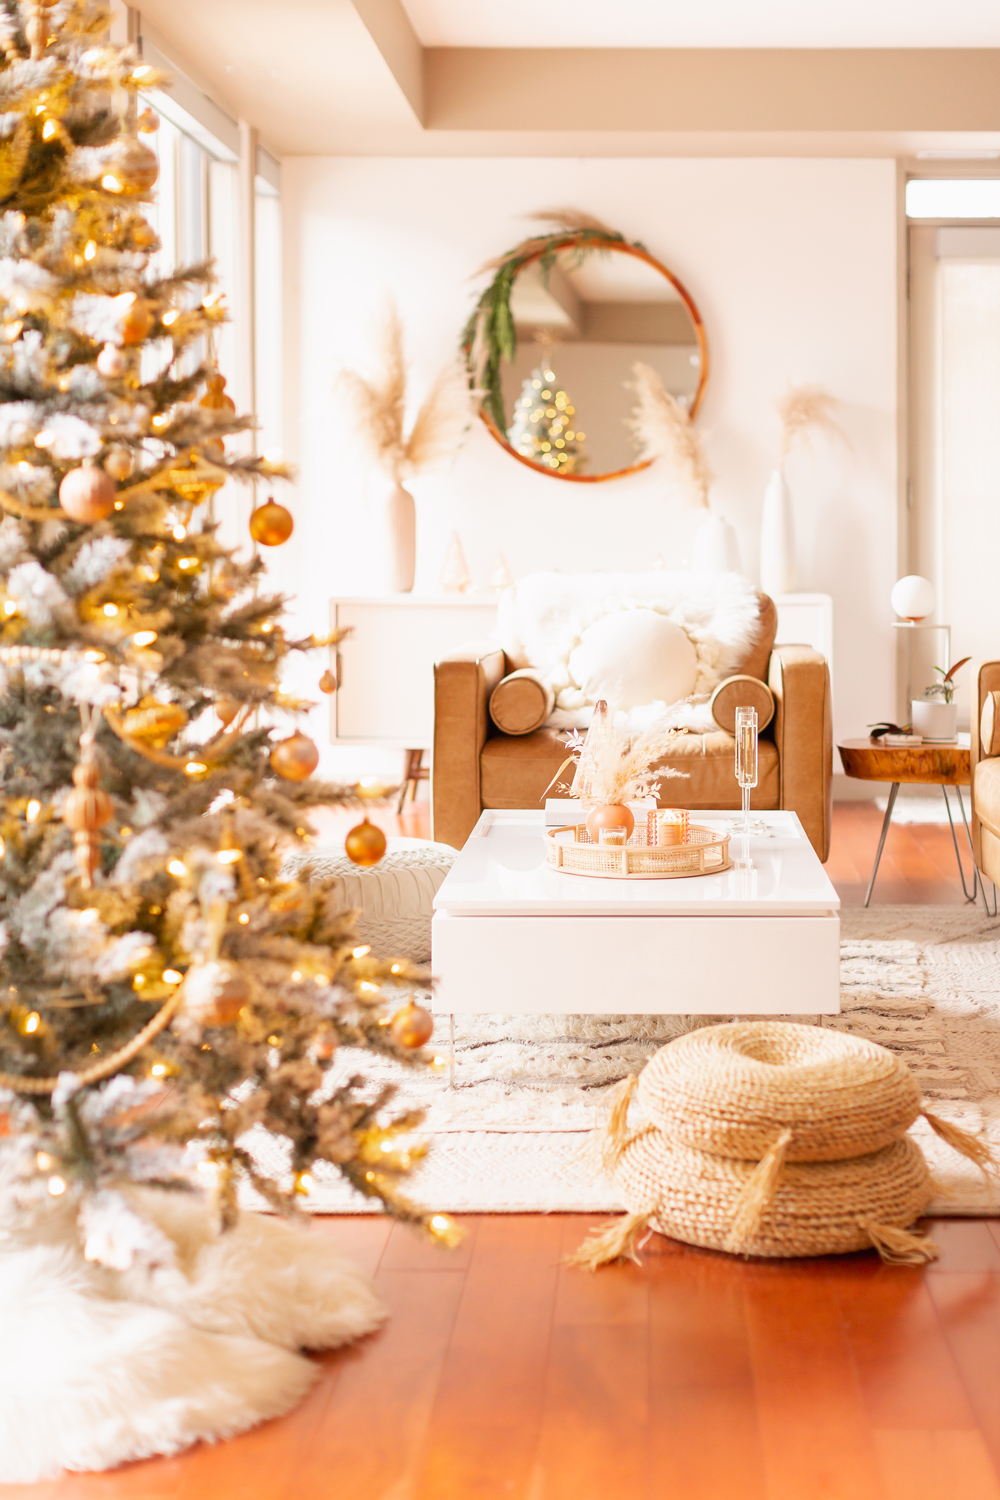 Mid Century Meets Boho Holiday Decor | Bright and airy Mid Century Modern Living Room with a Flocked Christmas Tree and Caramel Leather Couches | Mid Century Modern Christmas Tree Skirt | Boho Christmas Decorating Ideas for Apartments | Flocked Christmas Tree with Wood Garland, Metallic and Wood Ornaments | Bohemian Holiday Home Tour 2021 | Boho Chic Christmas Decor | Glam neutral holiday decor | Warm Holiday Decor | Pampas Grass Holiday Arrangement | Boho Christmas Tree // JustineCelina.com